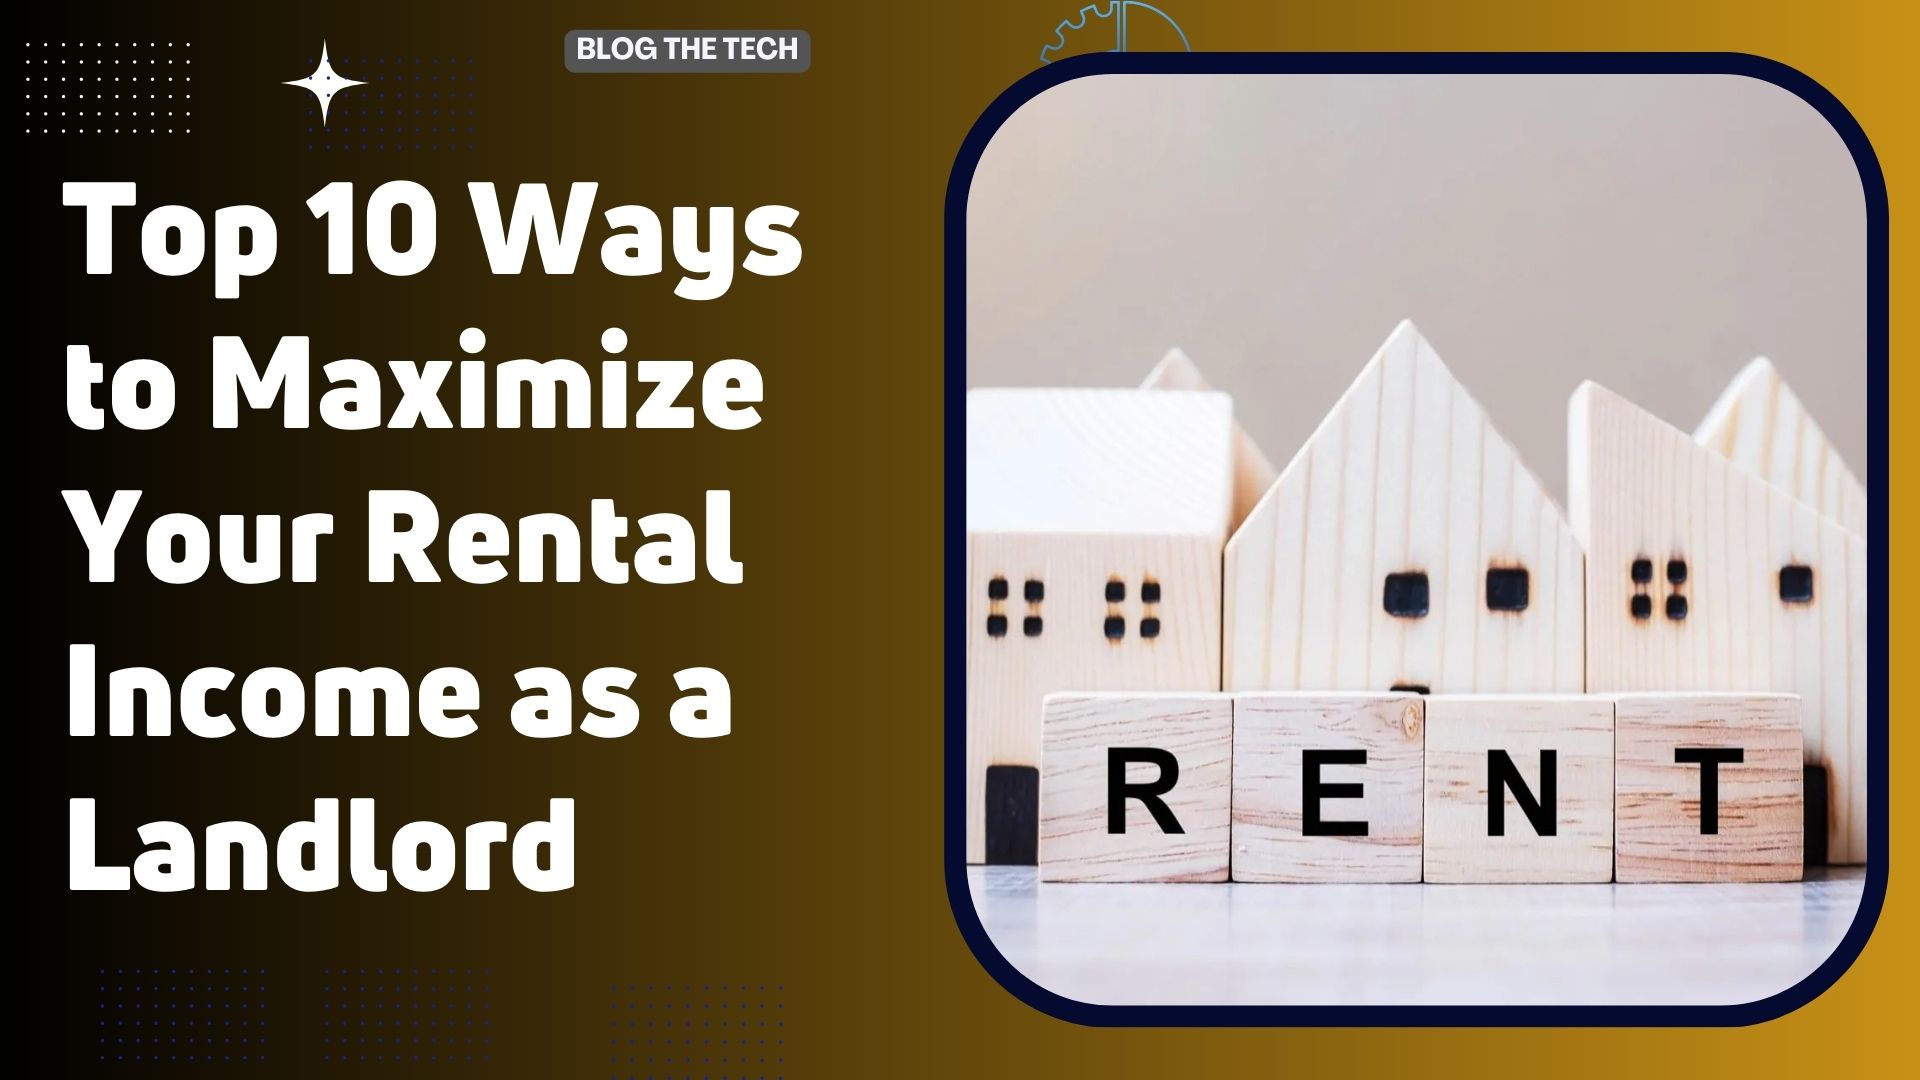 How to Maximize Your Rental Income as a Landlord